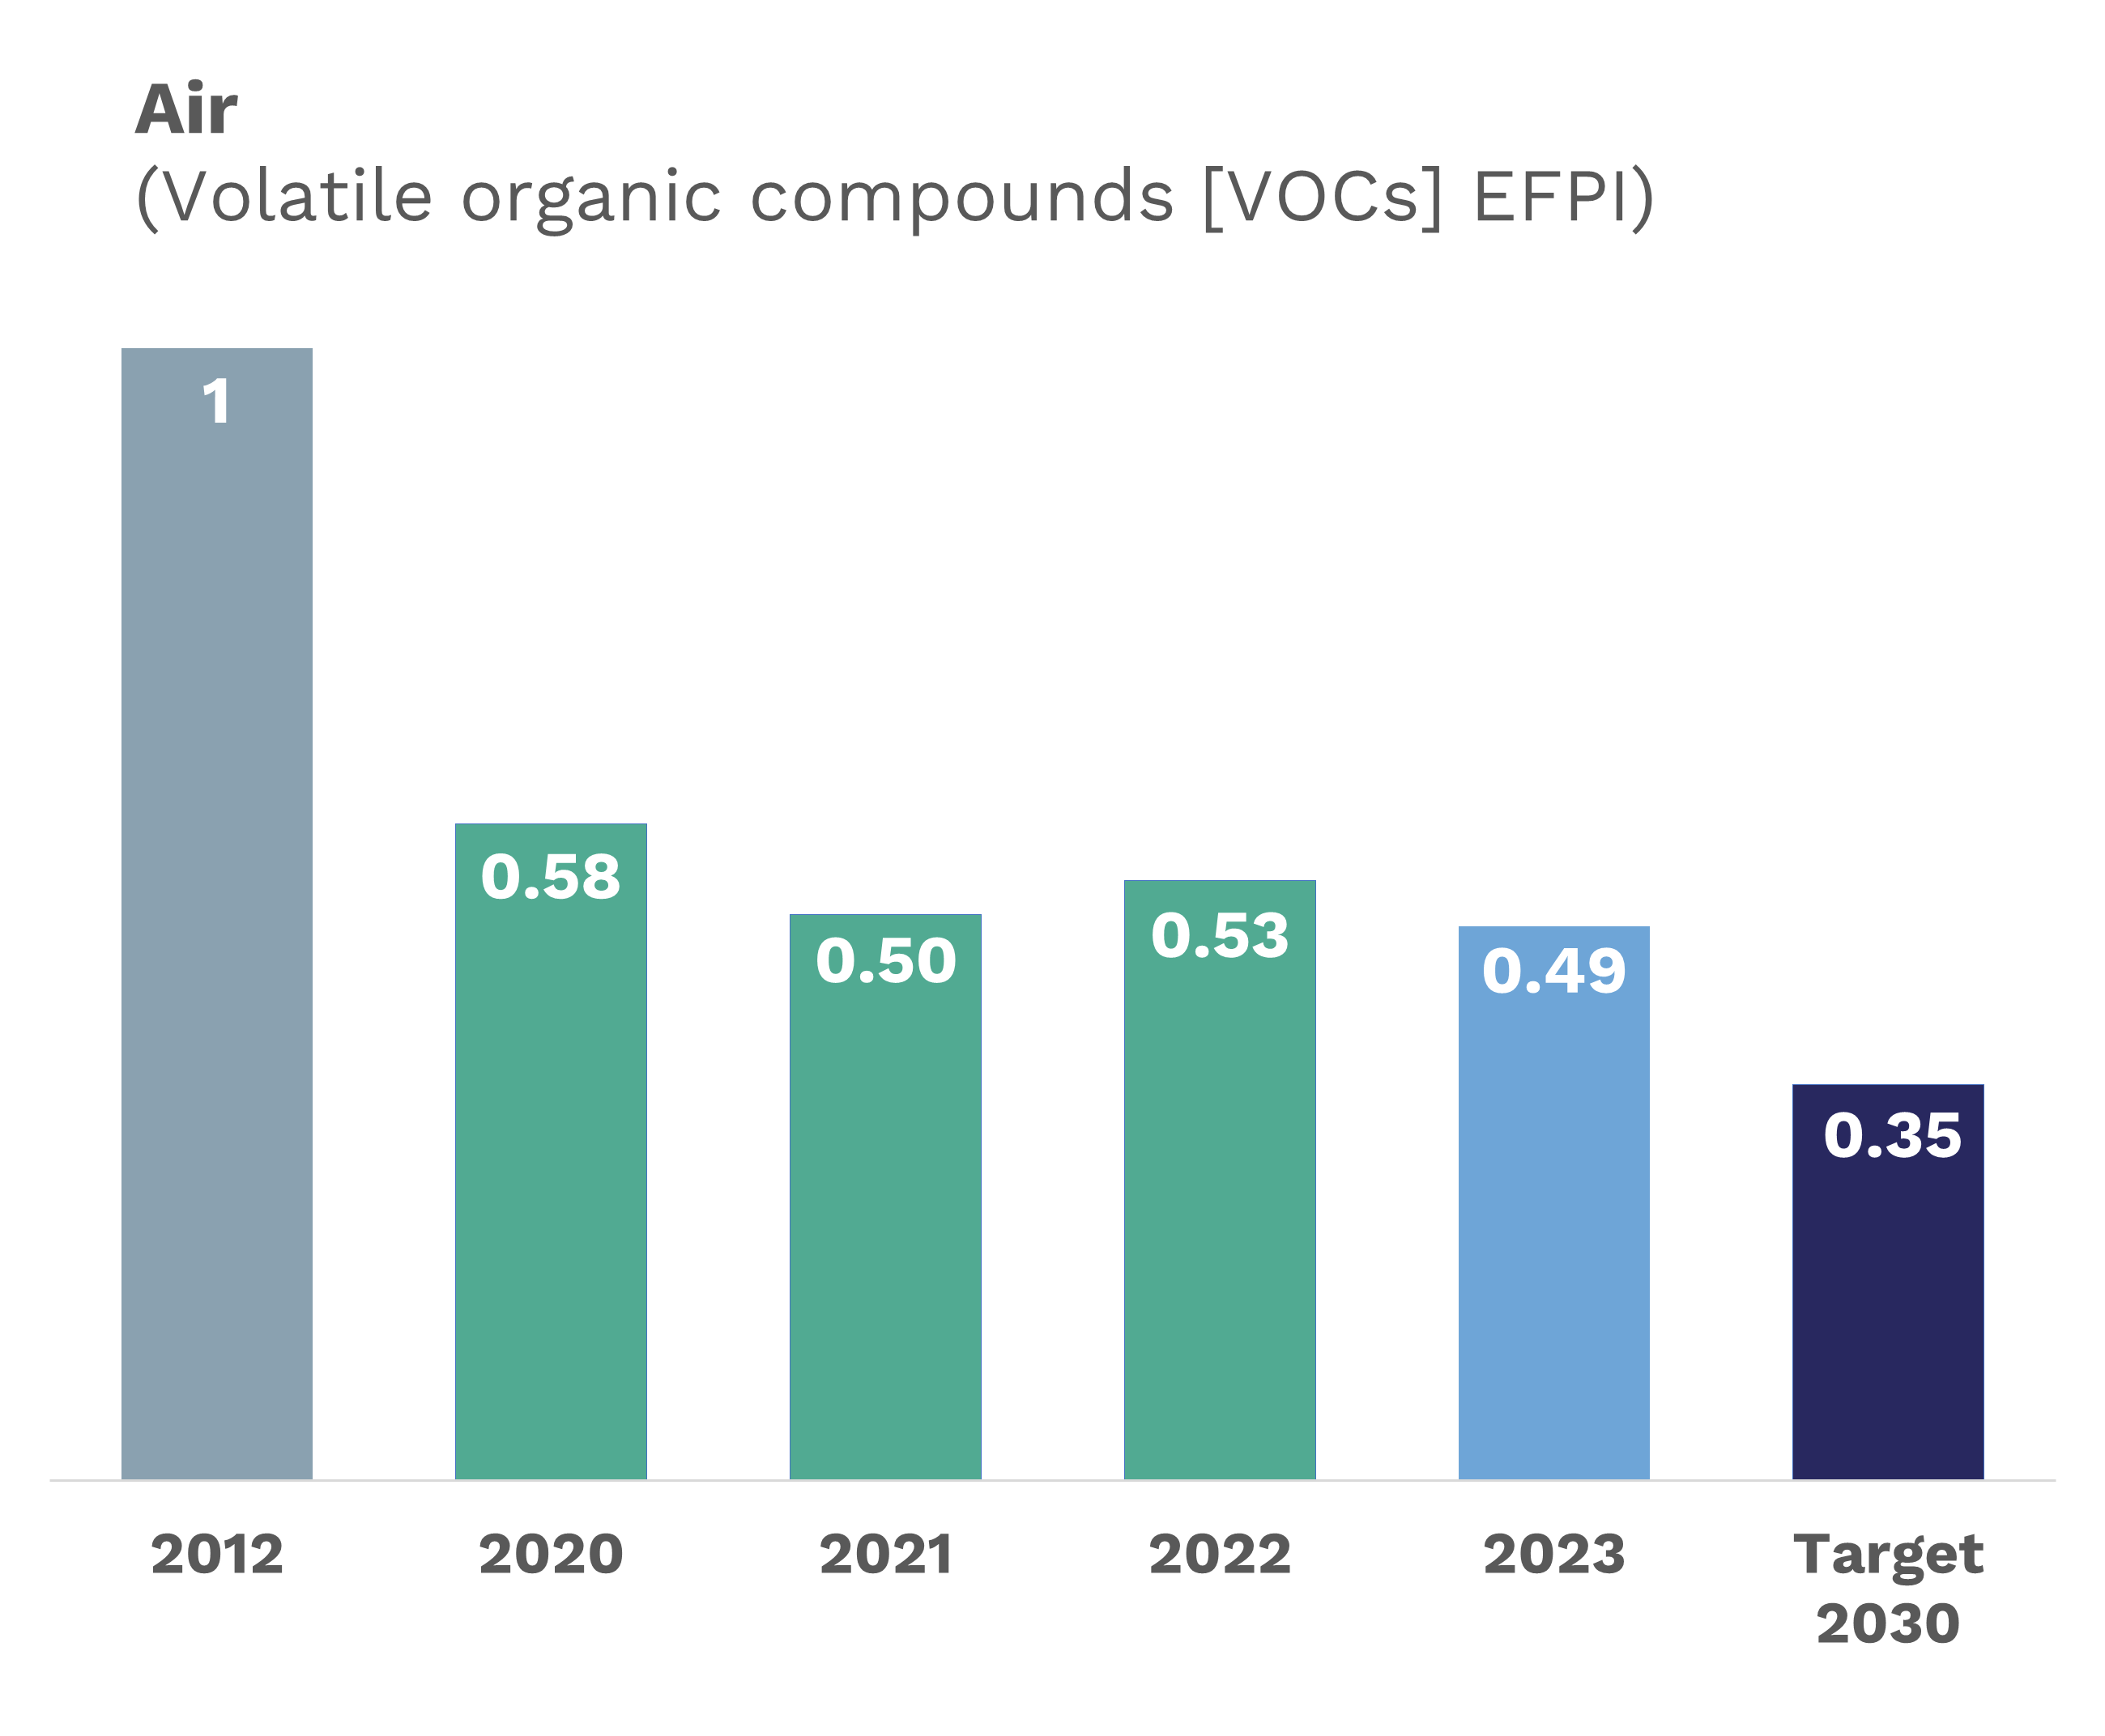 In 2023, Arkema reduced the emissions of volatile organic compounds into the air by 51% compared to 2012.